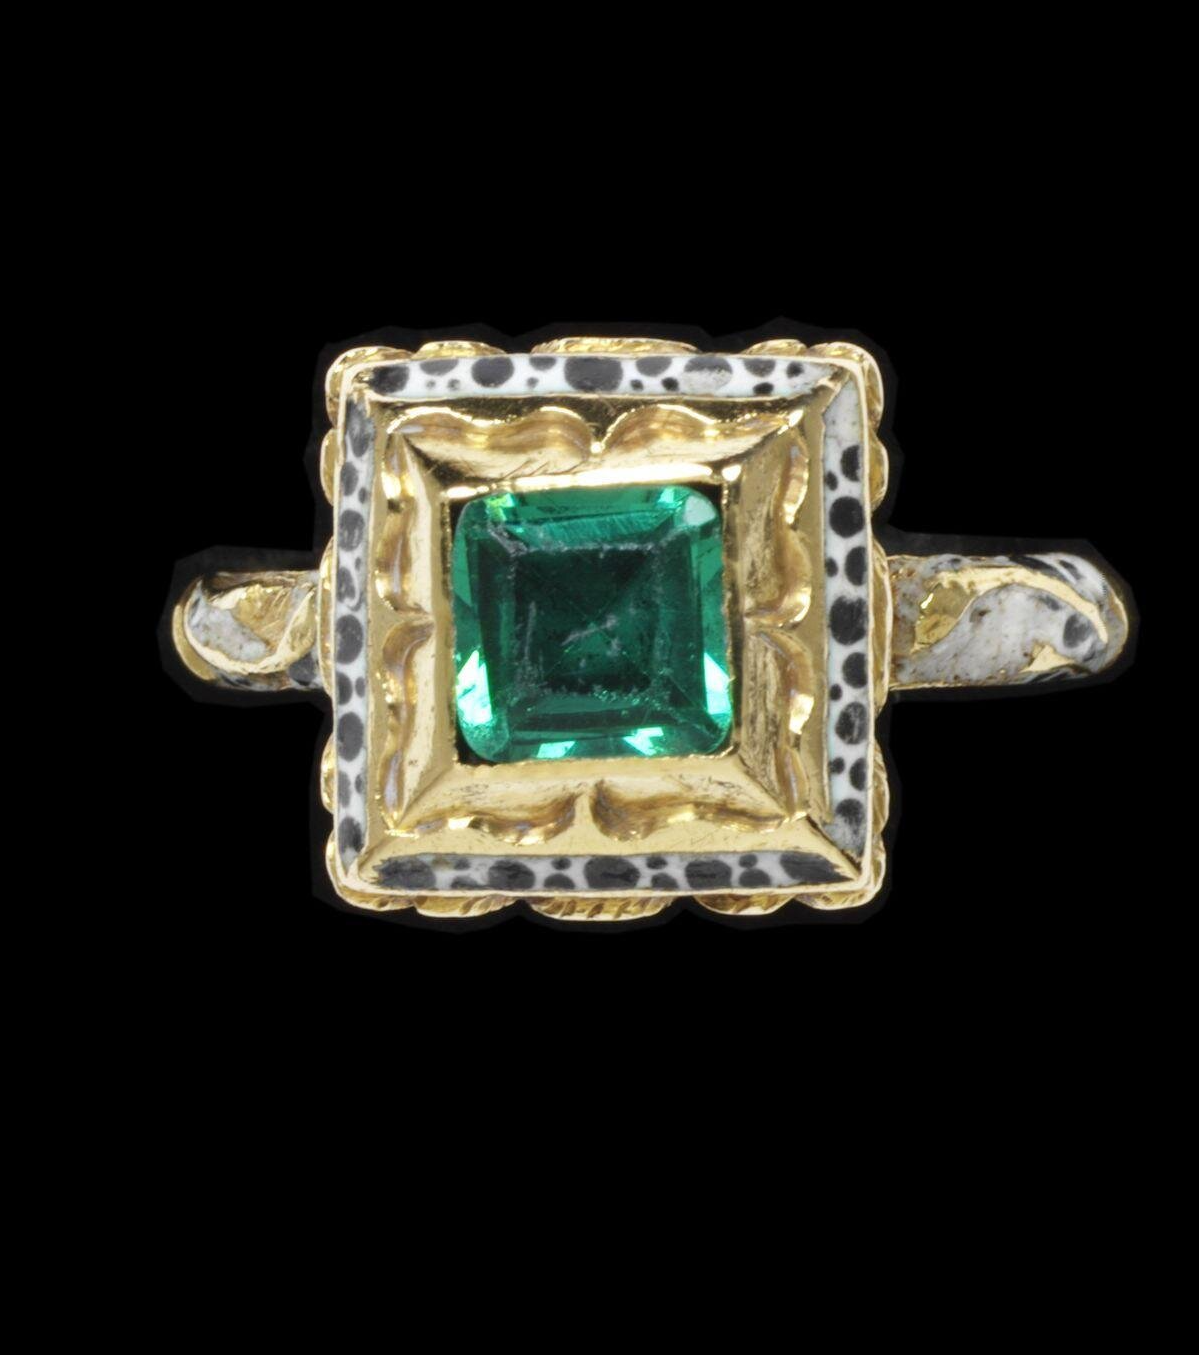 Enameled gold ring set with glass emerald, 1650-1700. The Victoria & Albert Museum.